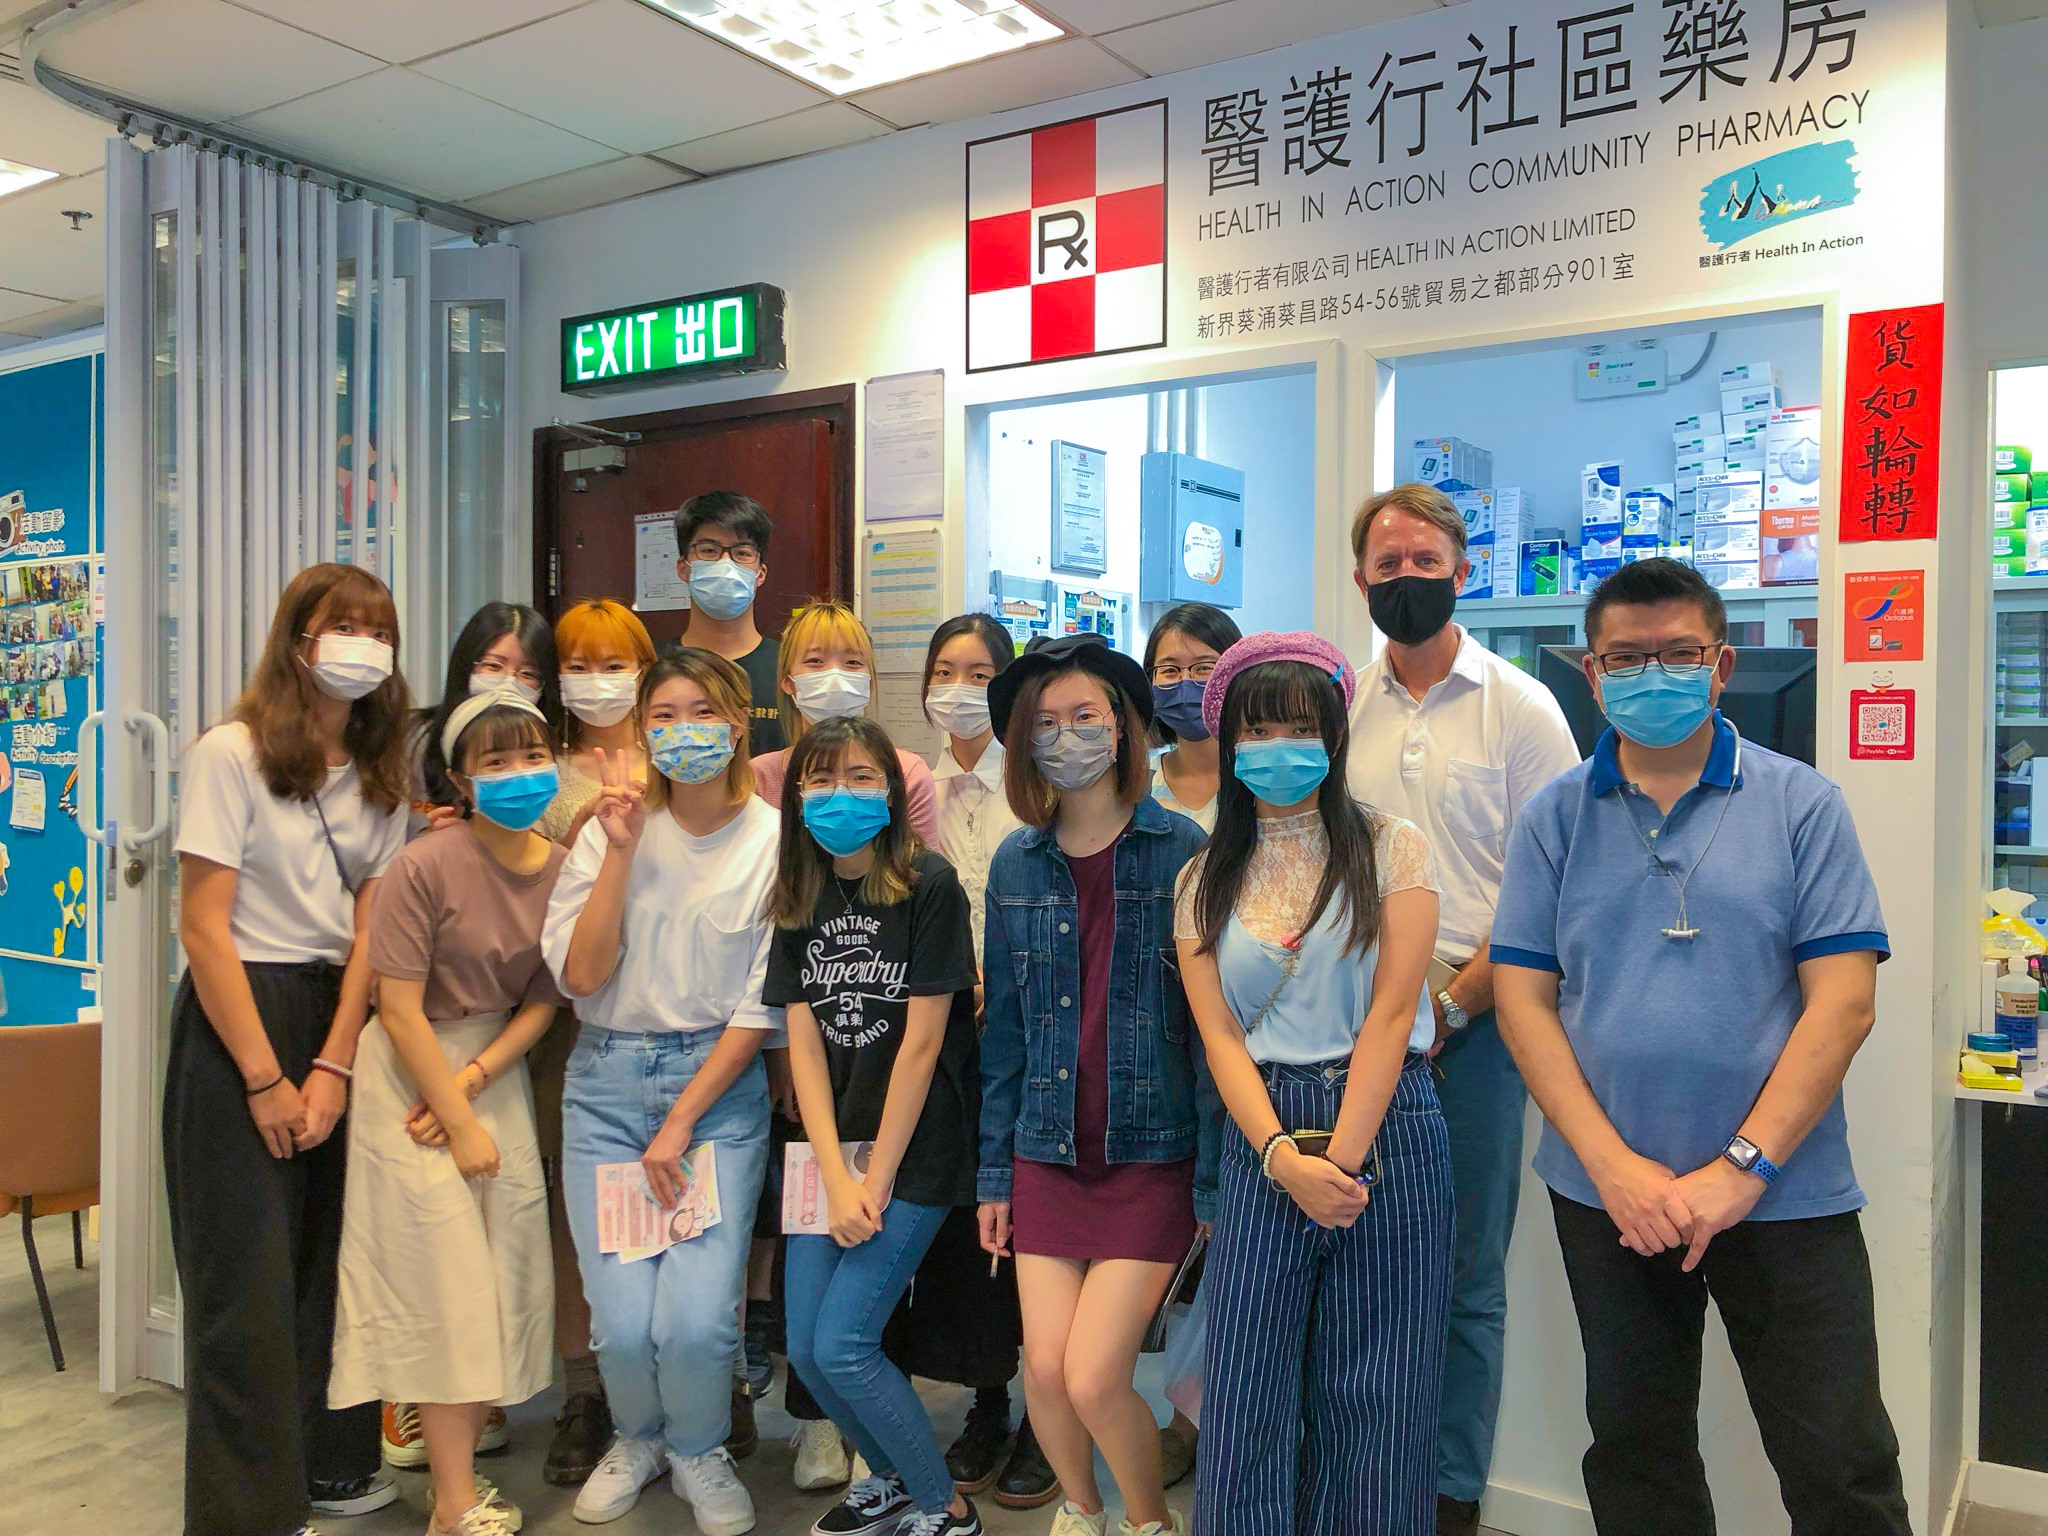 Public Health Strategic Plan on Drug Icon Promotion to Young People in Hong Kong